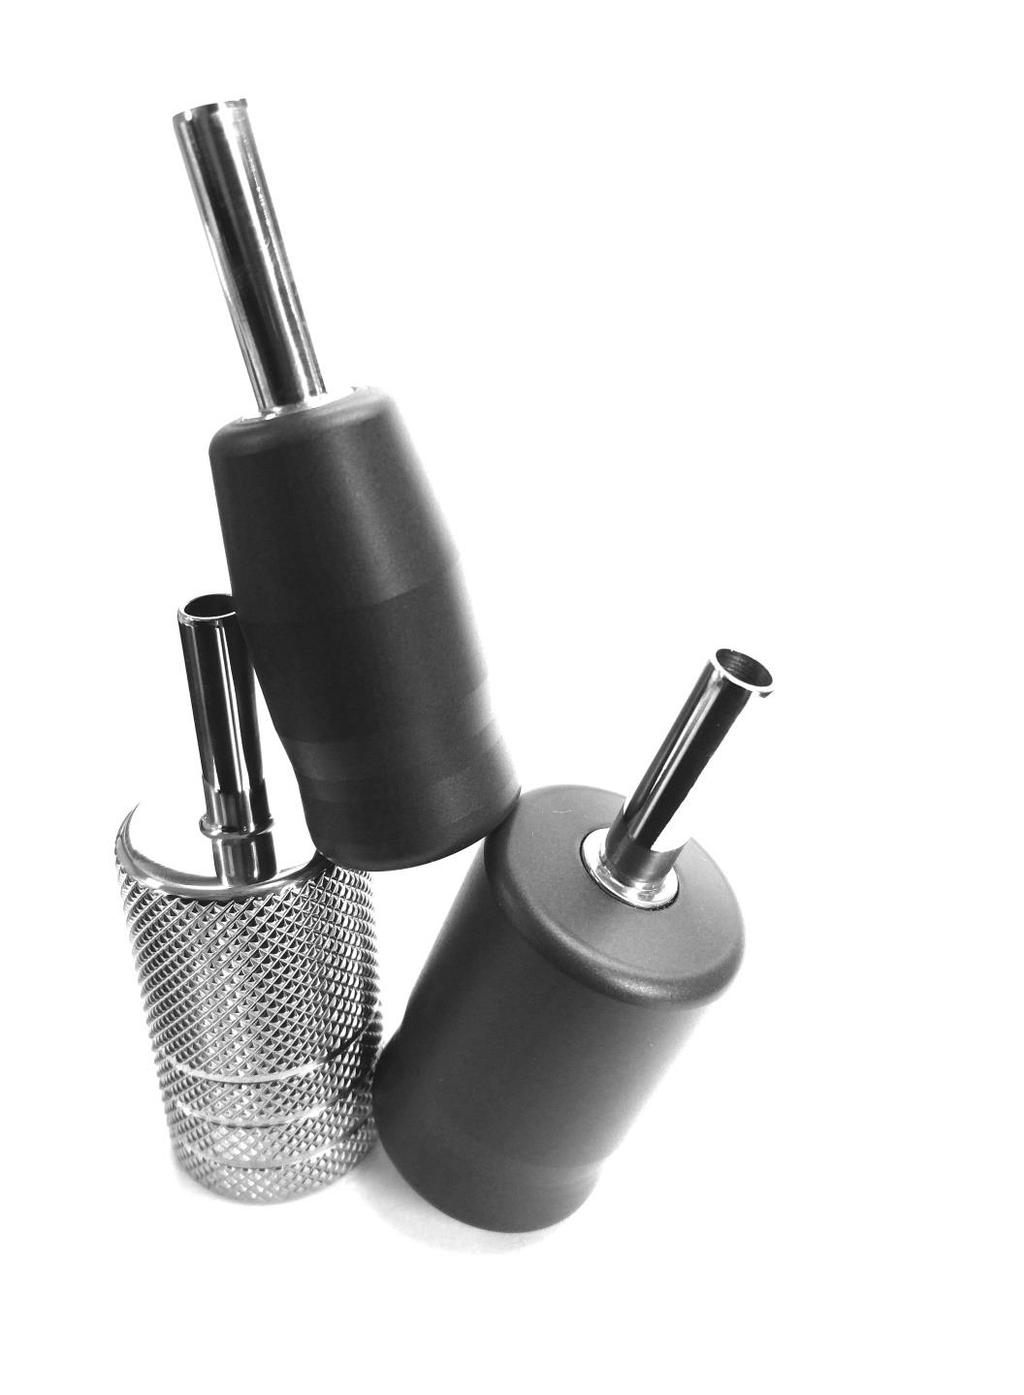 Made with Type 304 & 316 Stainless Steel Bayonet socket Available in 2 styles